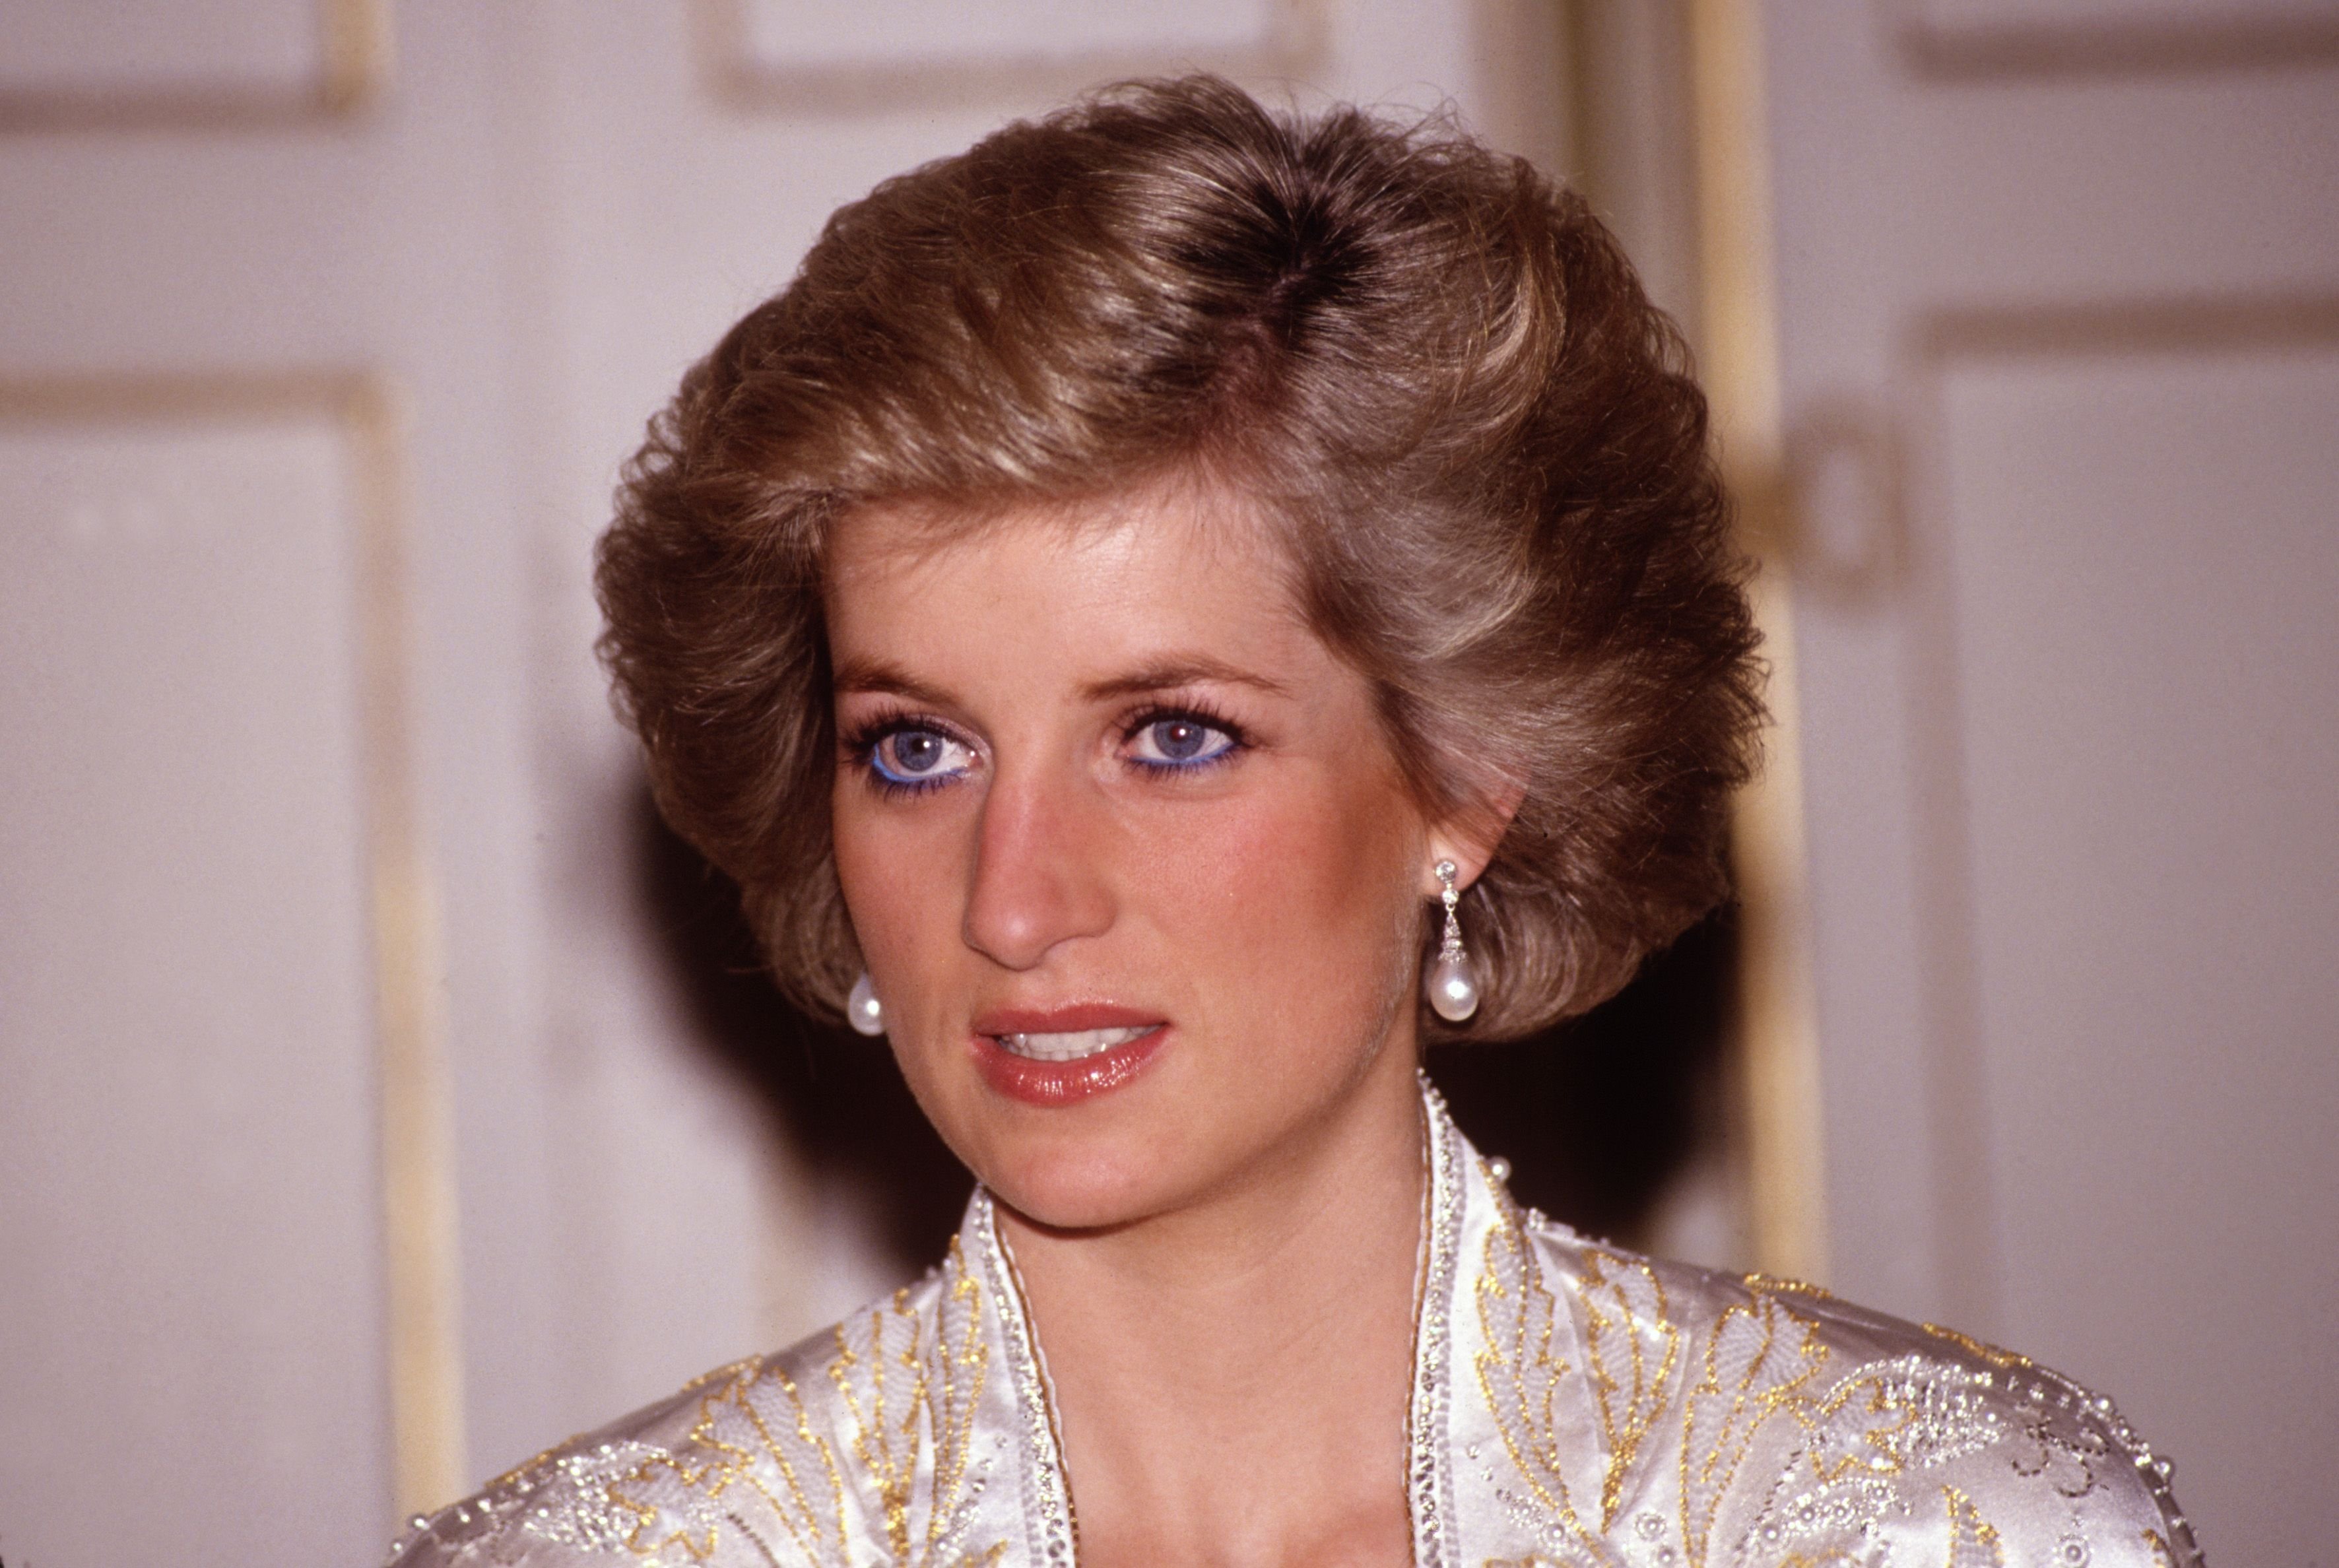 Princess Diana at a dinner given by President Mitterand at the Elysee Palace in 1988. | Photo: Getty Images